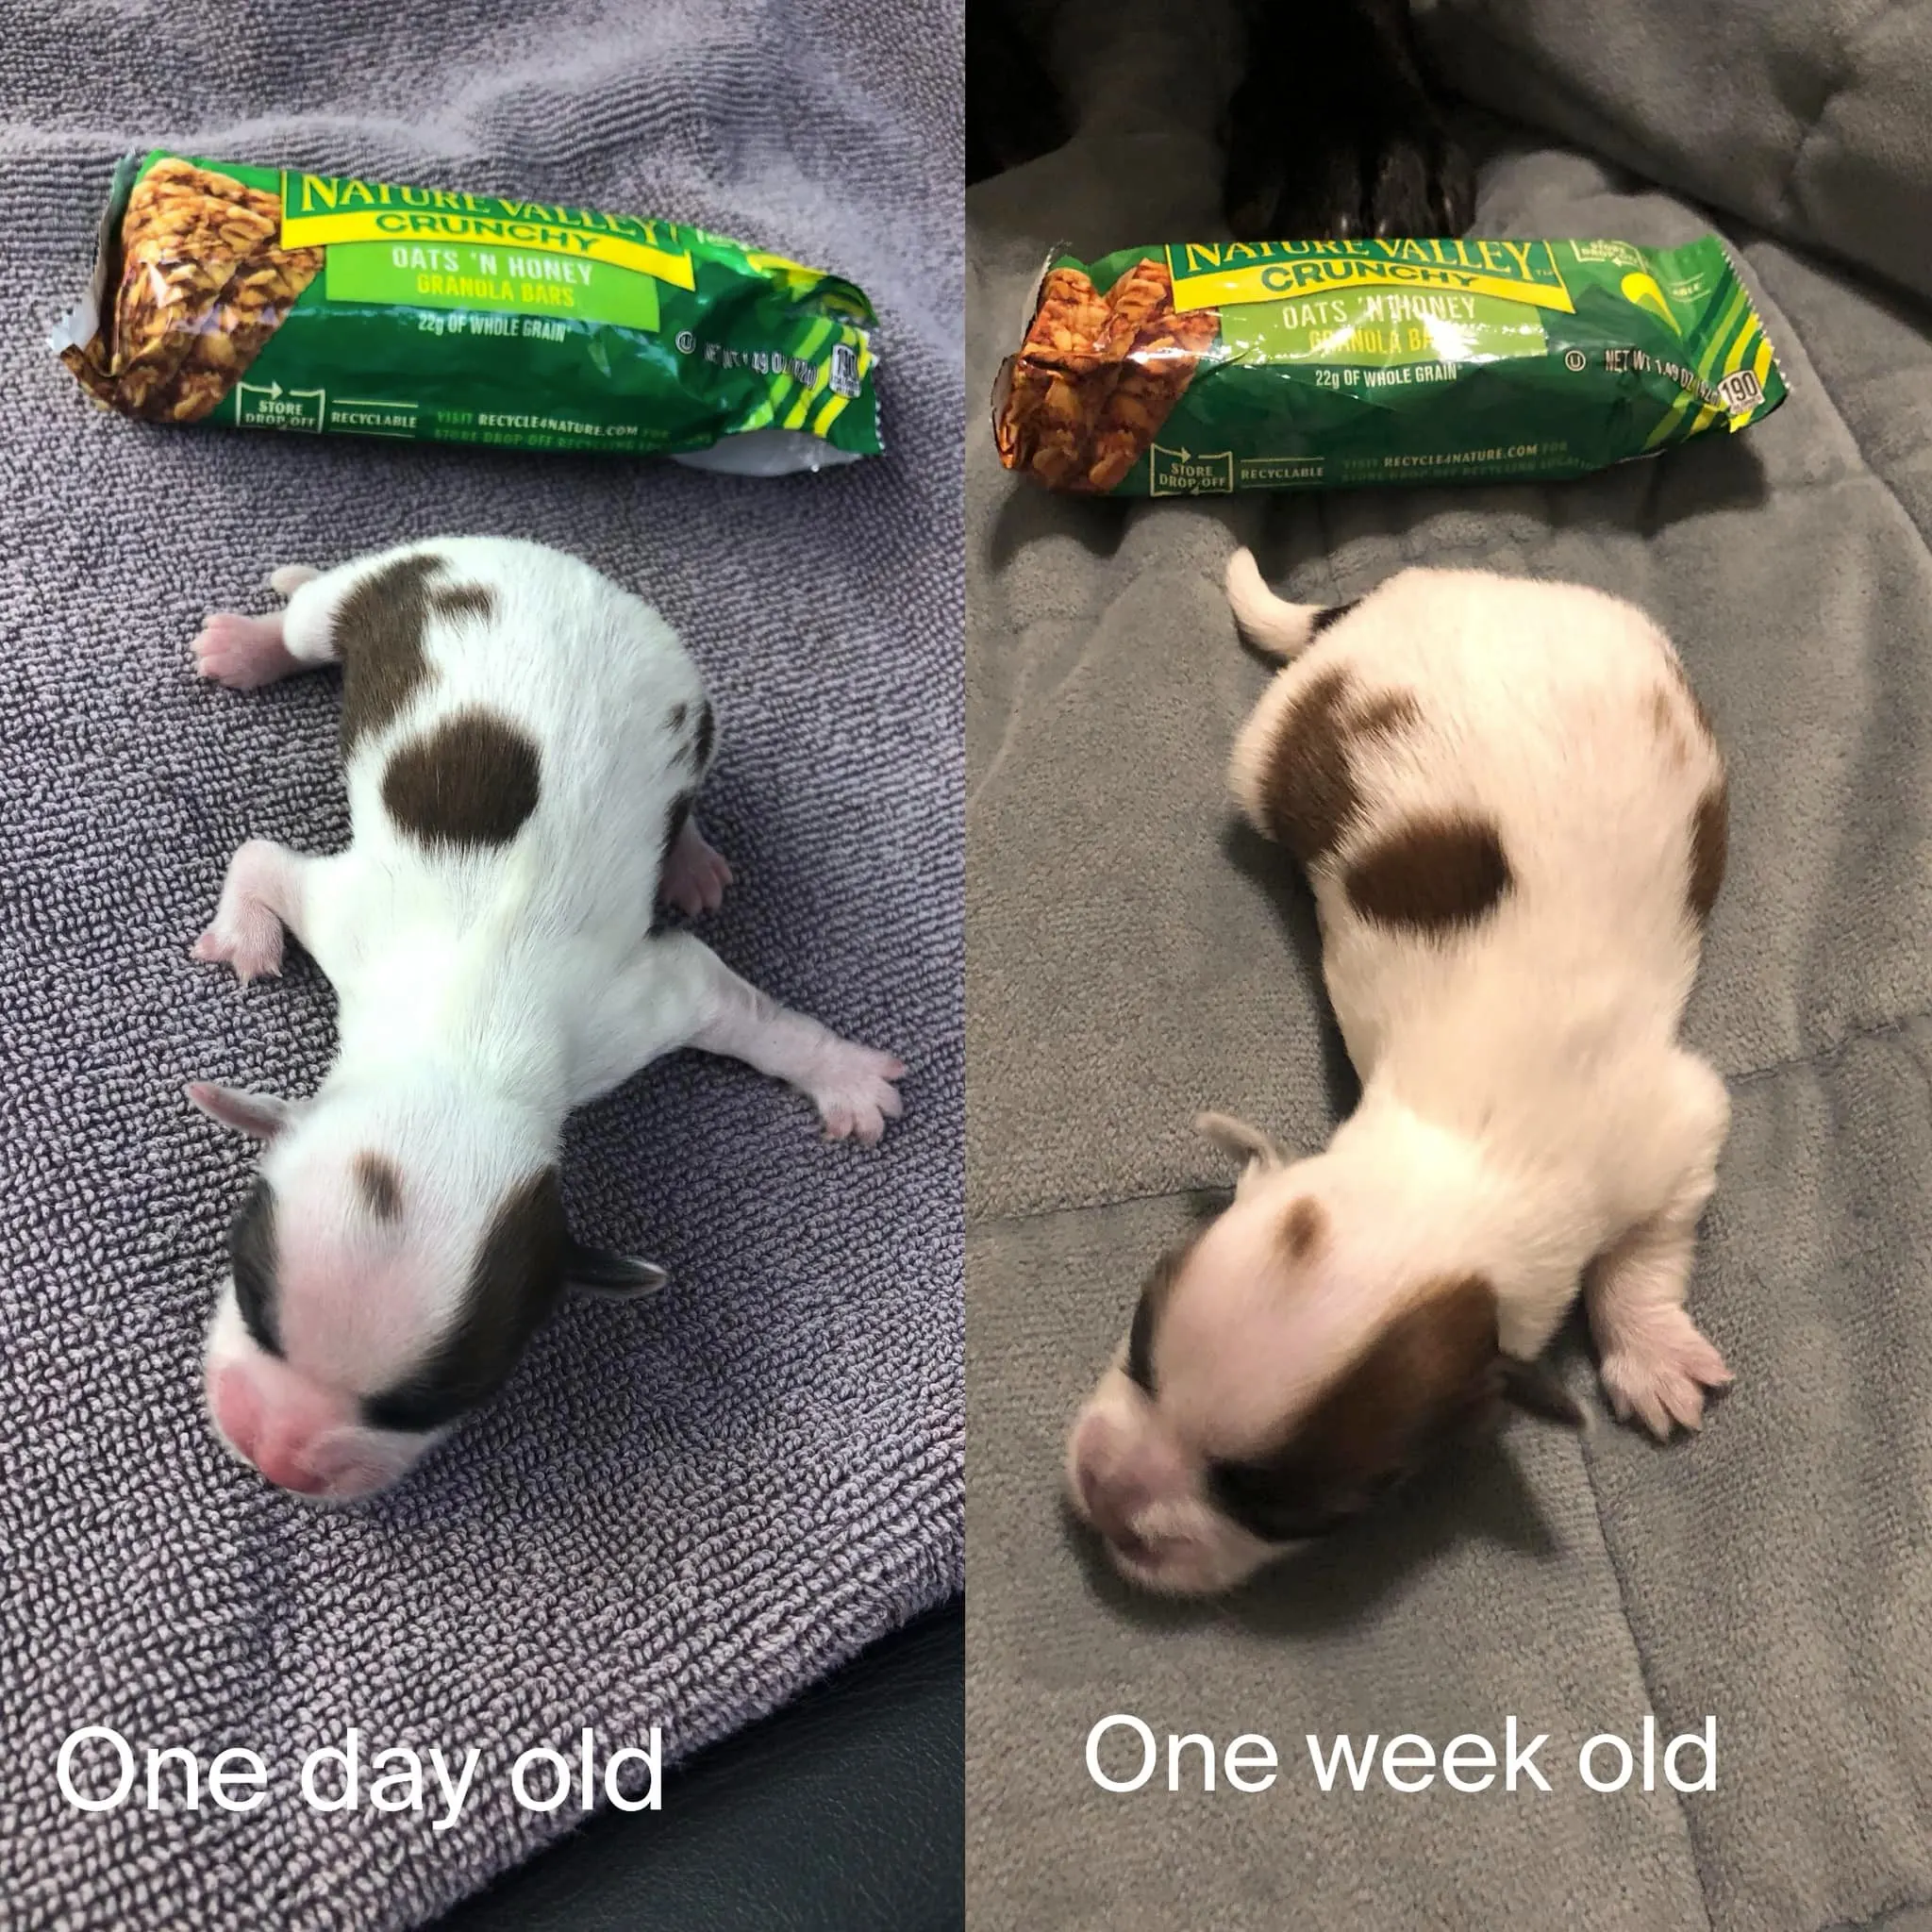 Little puppy with size smaller than chocolate bar